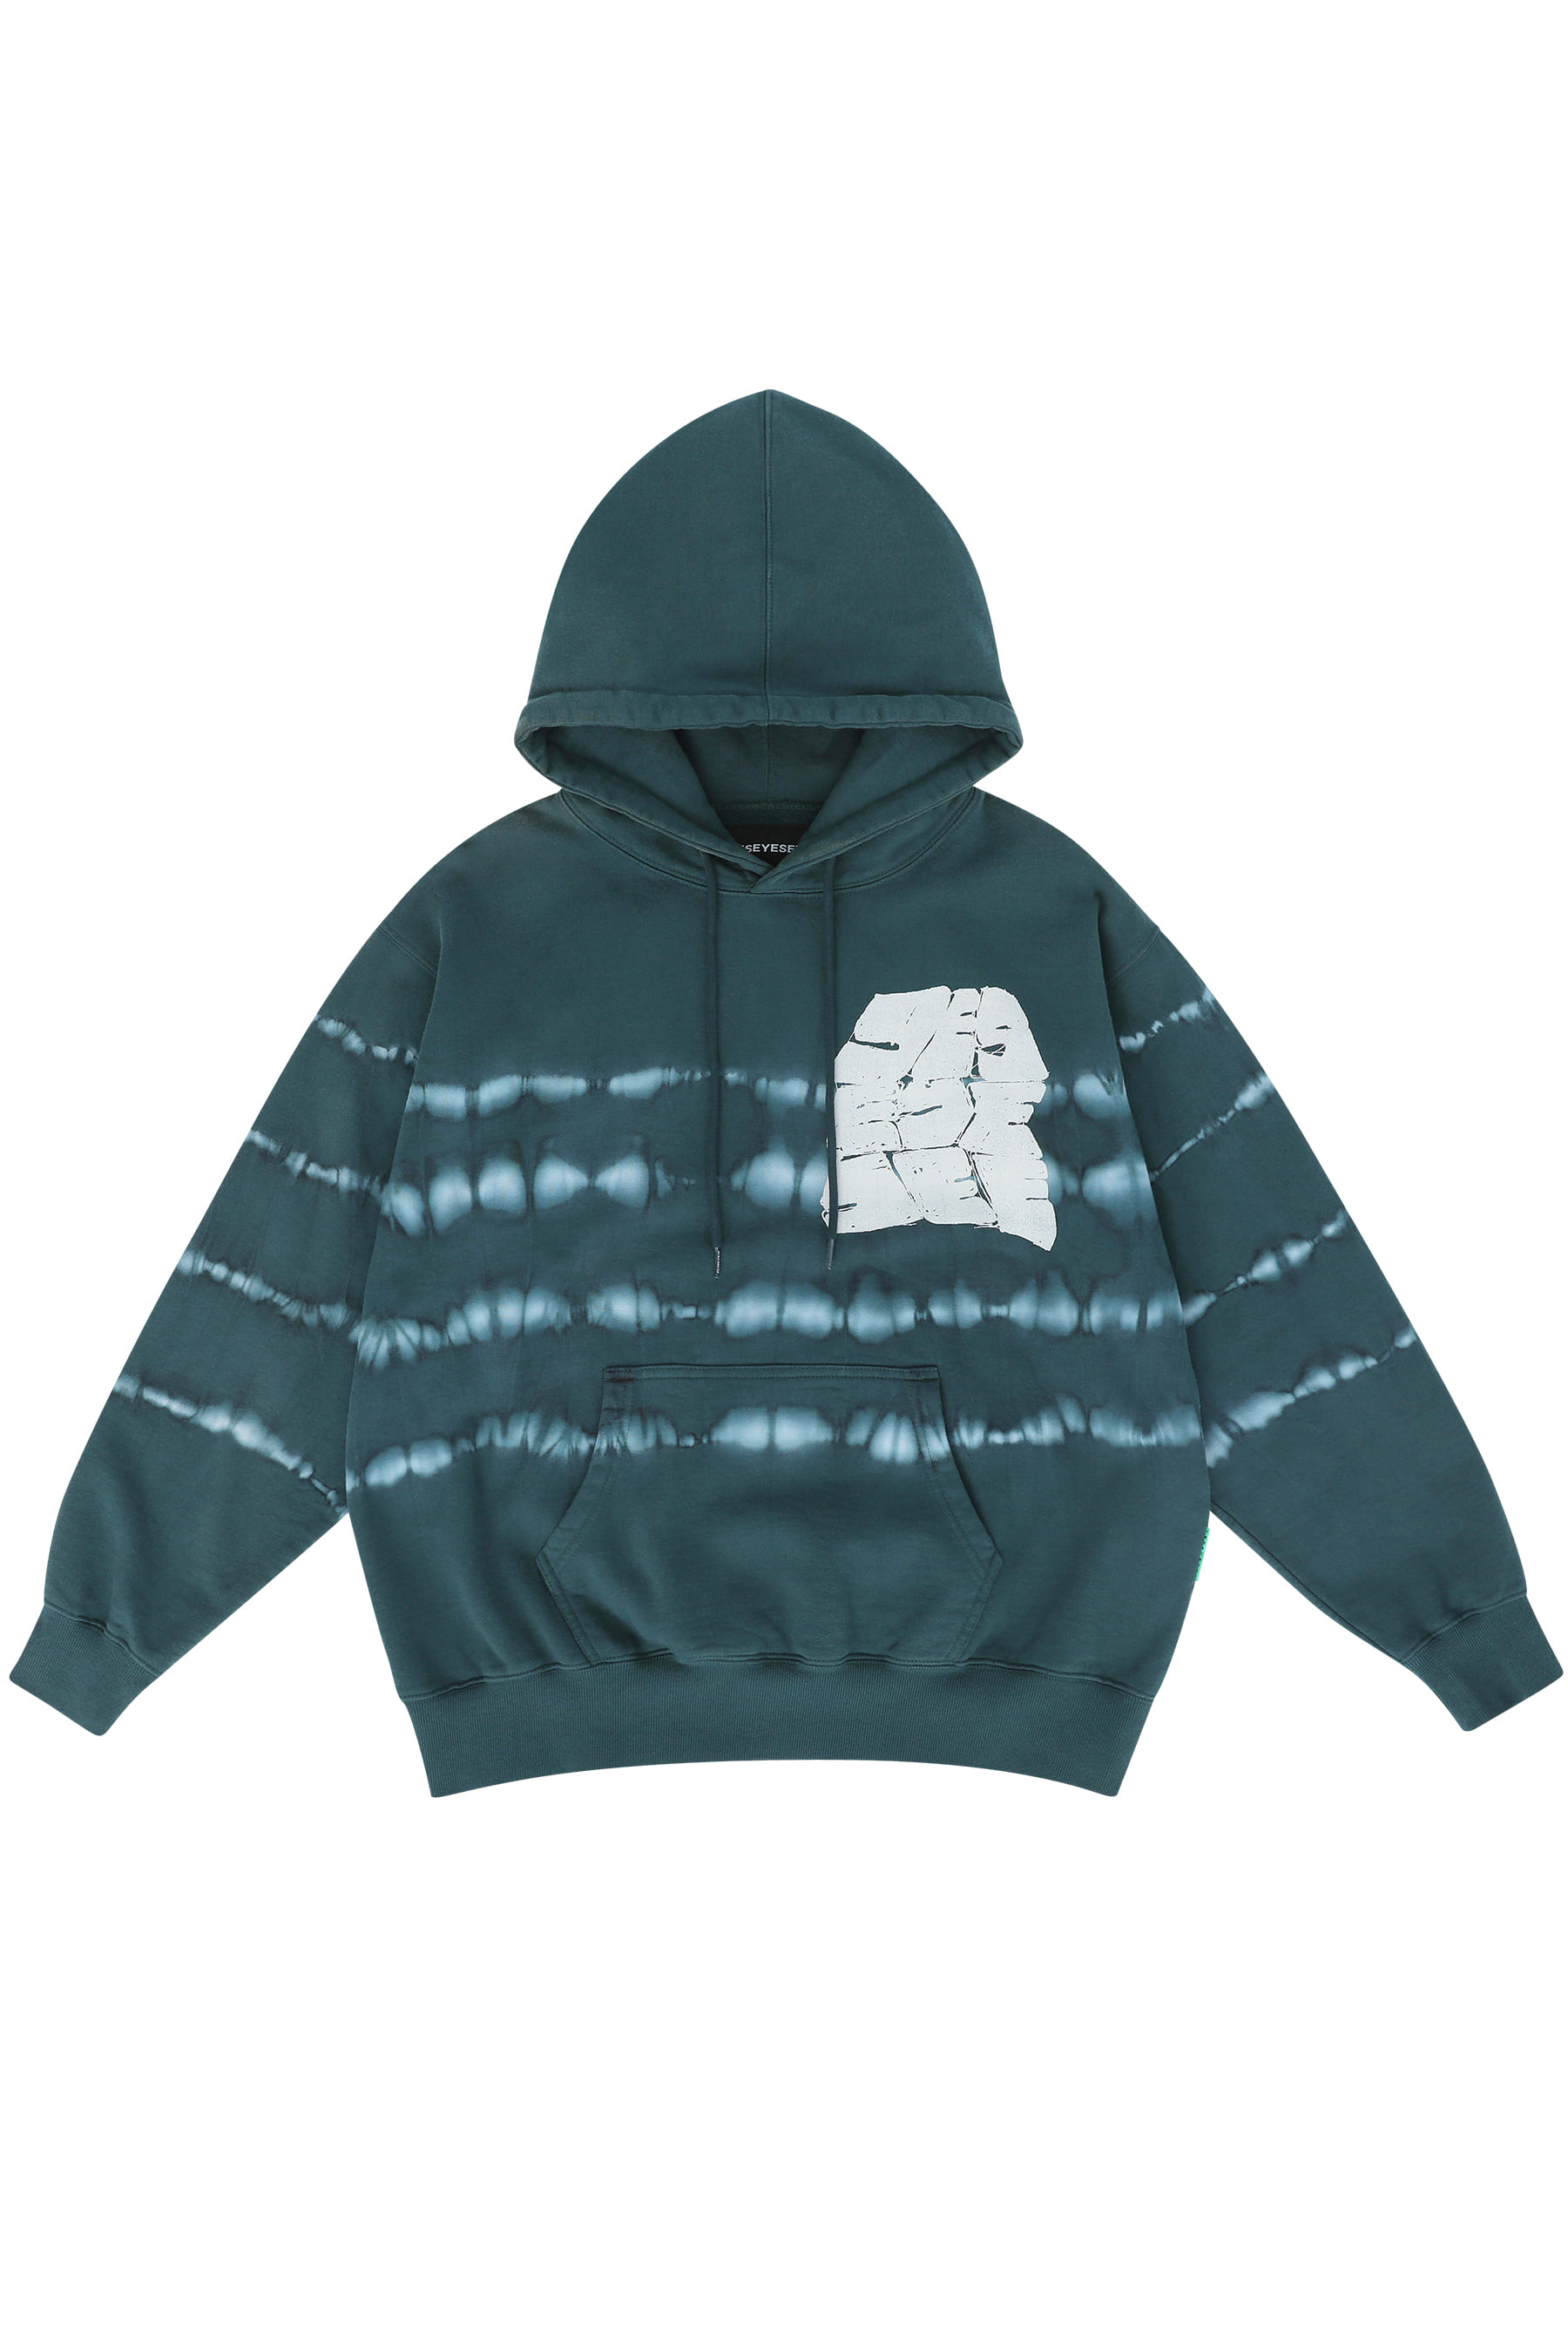 Y.E.S Tie Dyed Hoodie Green